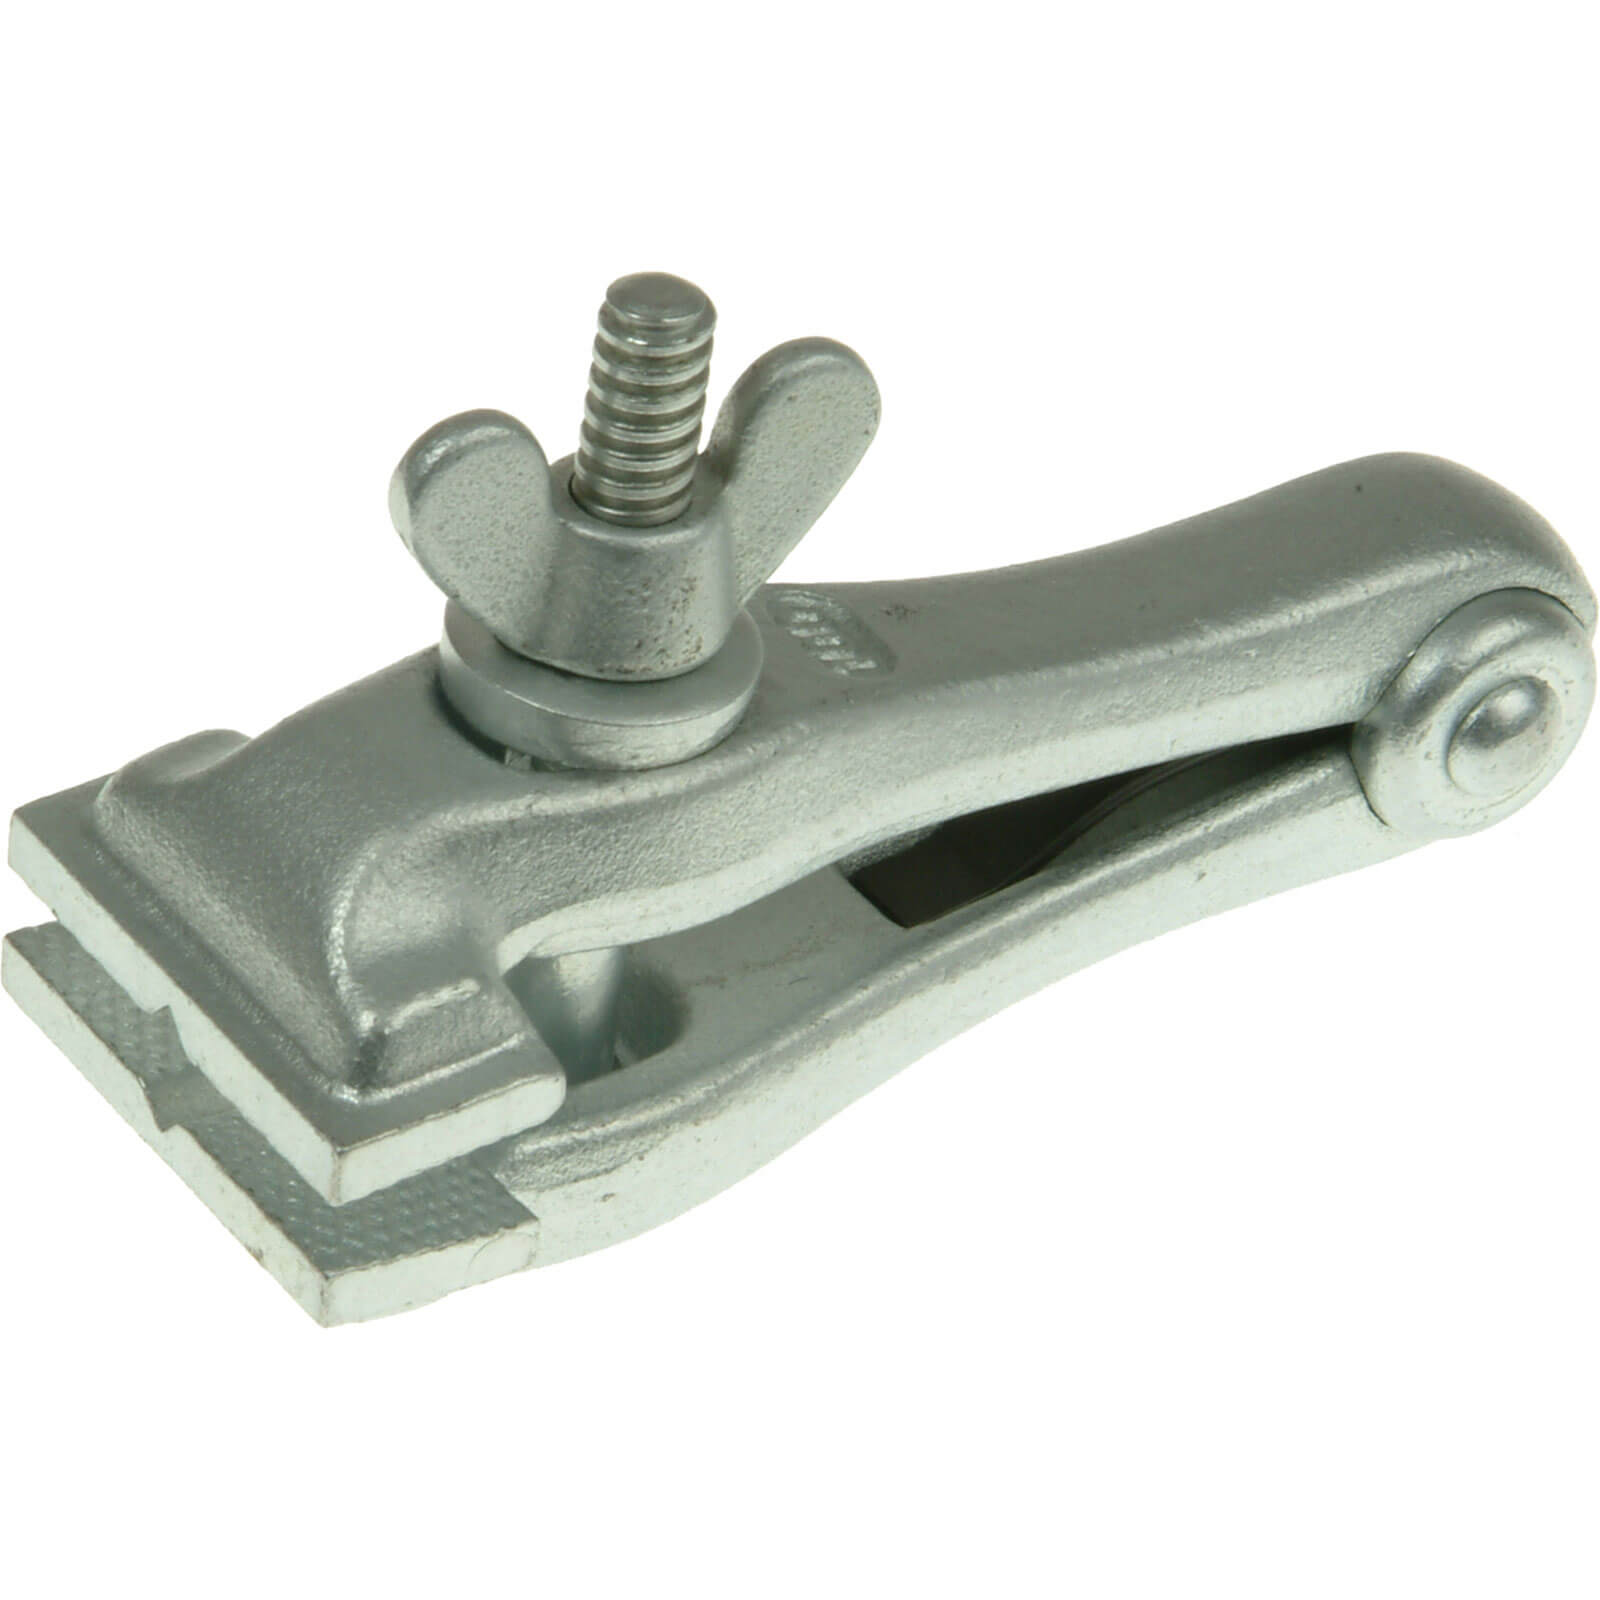 Image of Priory Engineers Hand Vice 125mm